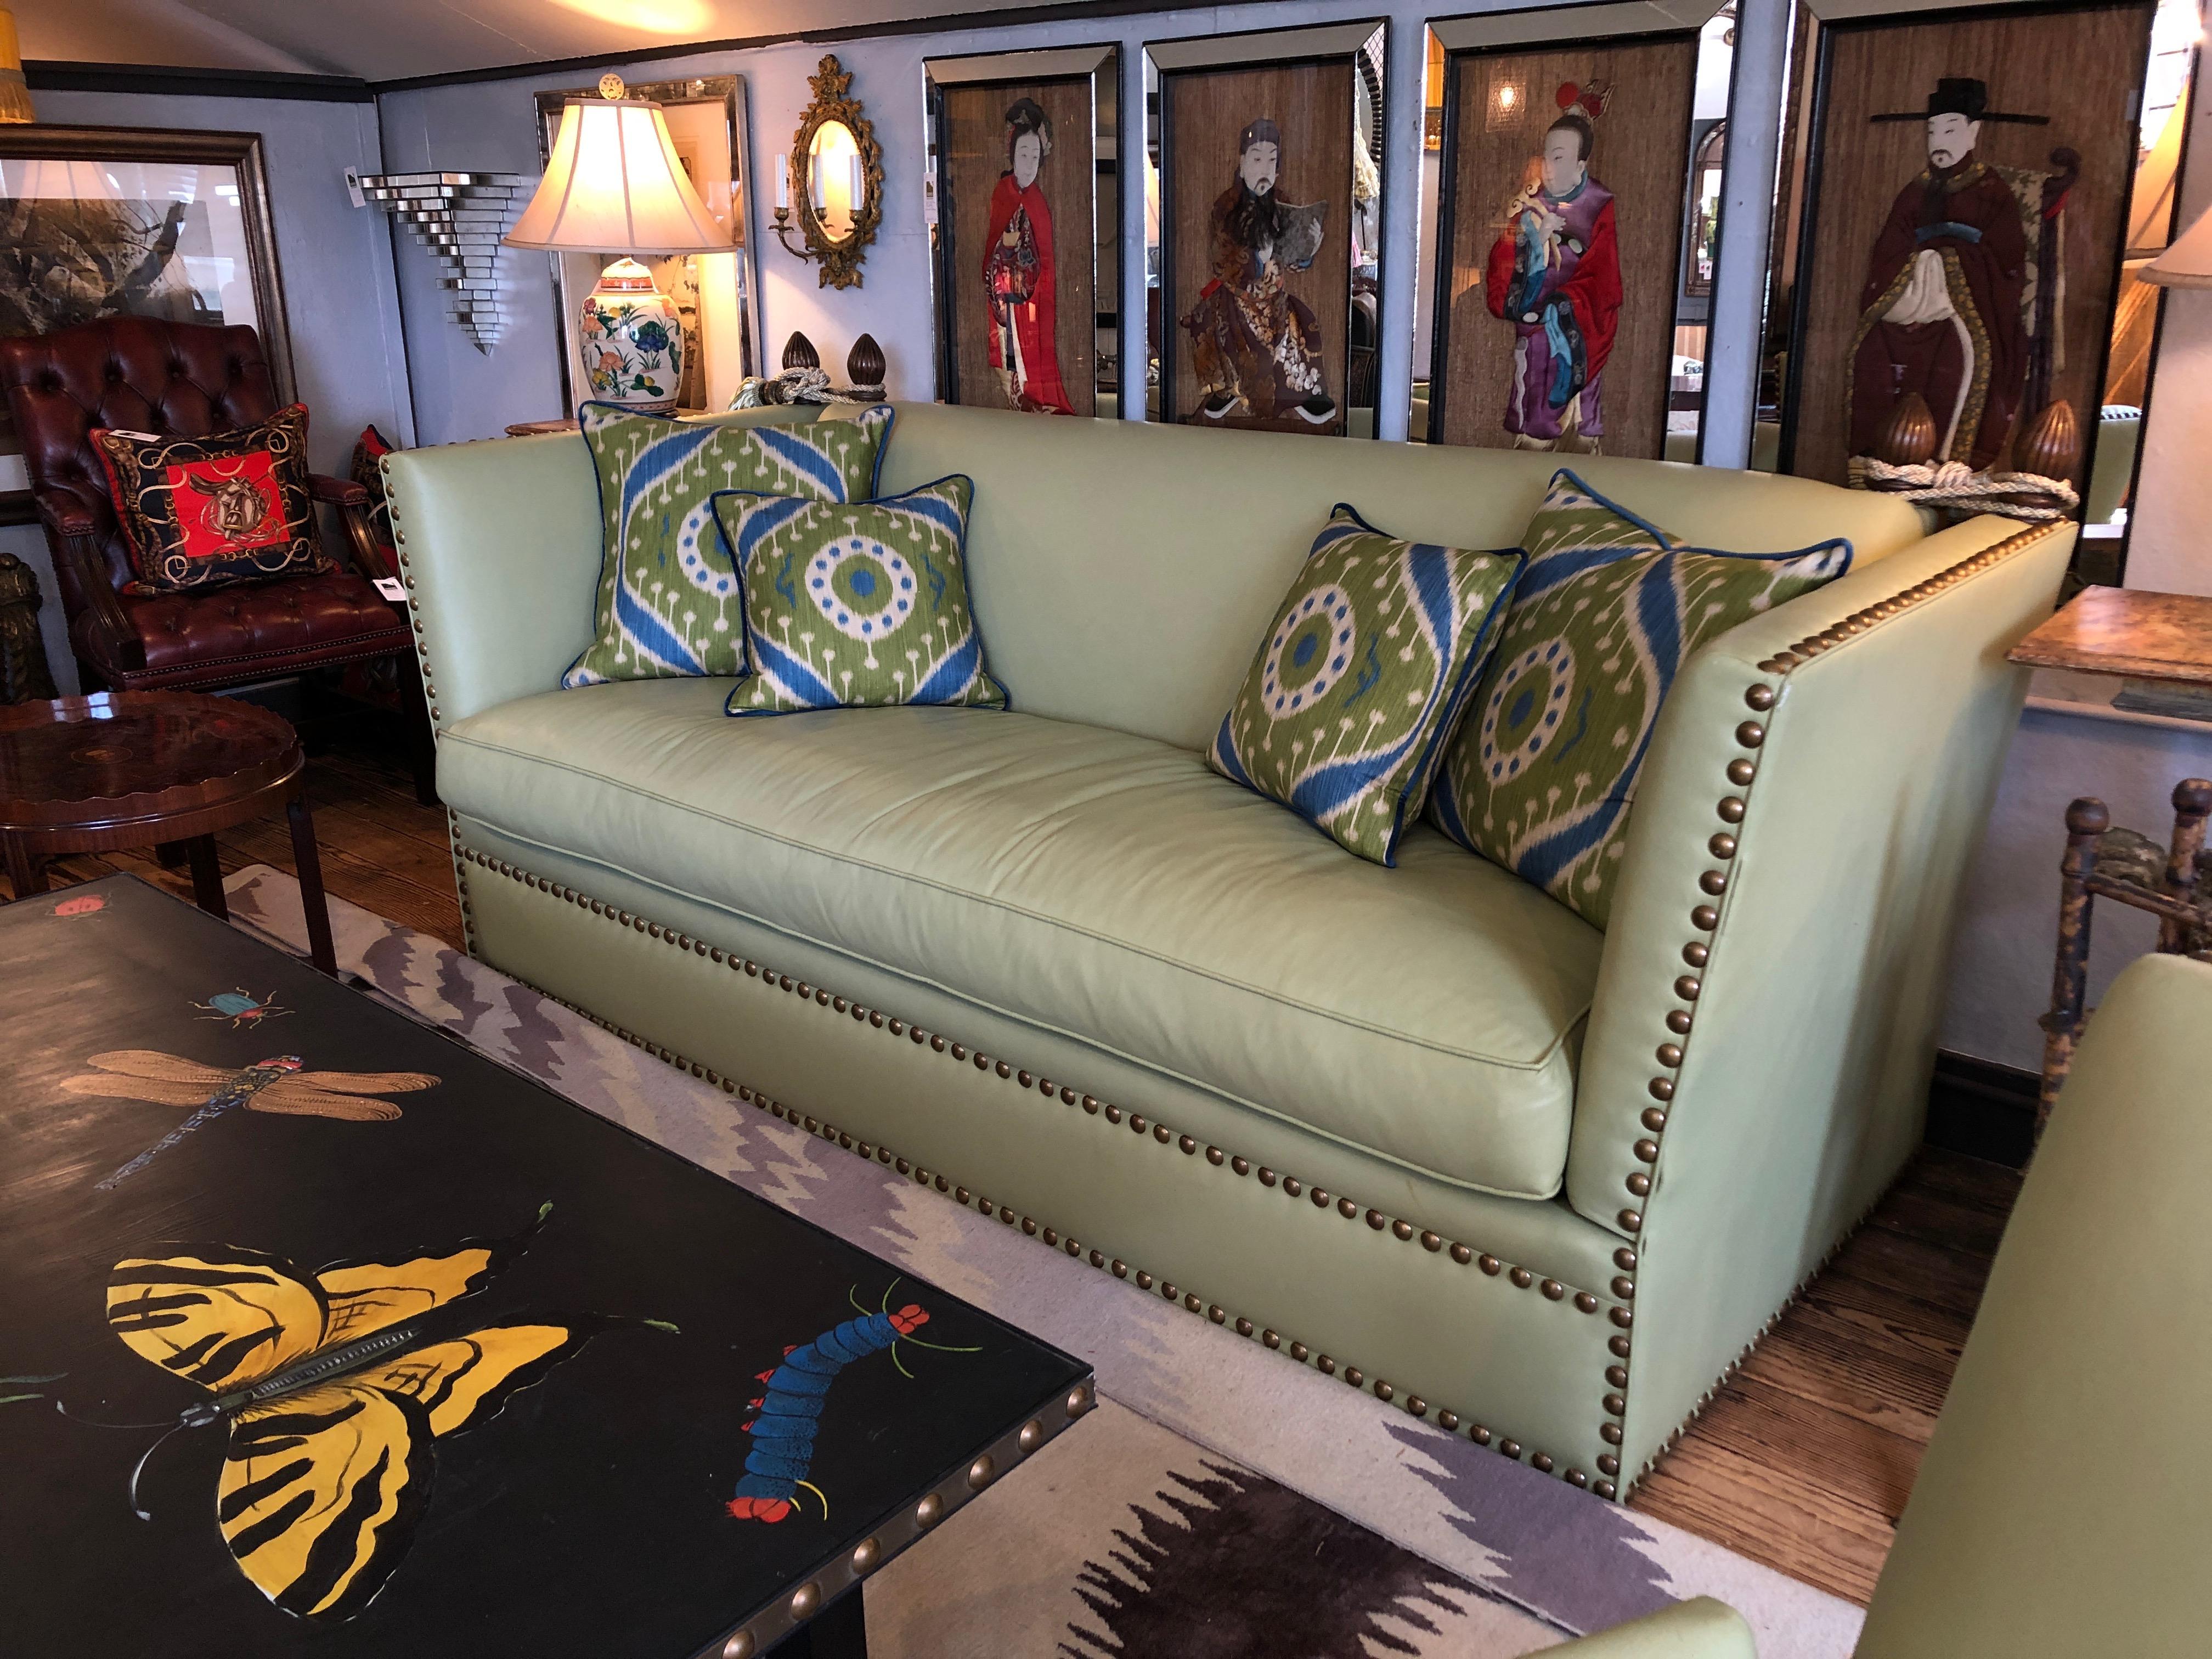 A fabulously stylish version of a Classic Knole sofa having mahogany finials at the top corners with rope and tassels, in a sizzling hot soft shade of lime green leather finished with big bold brass nailheads. Coordinating Ikat inspired contemporary